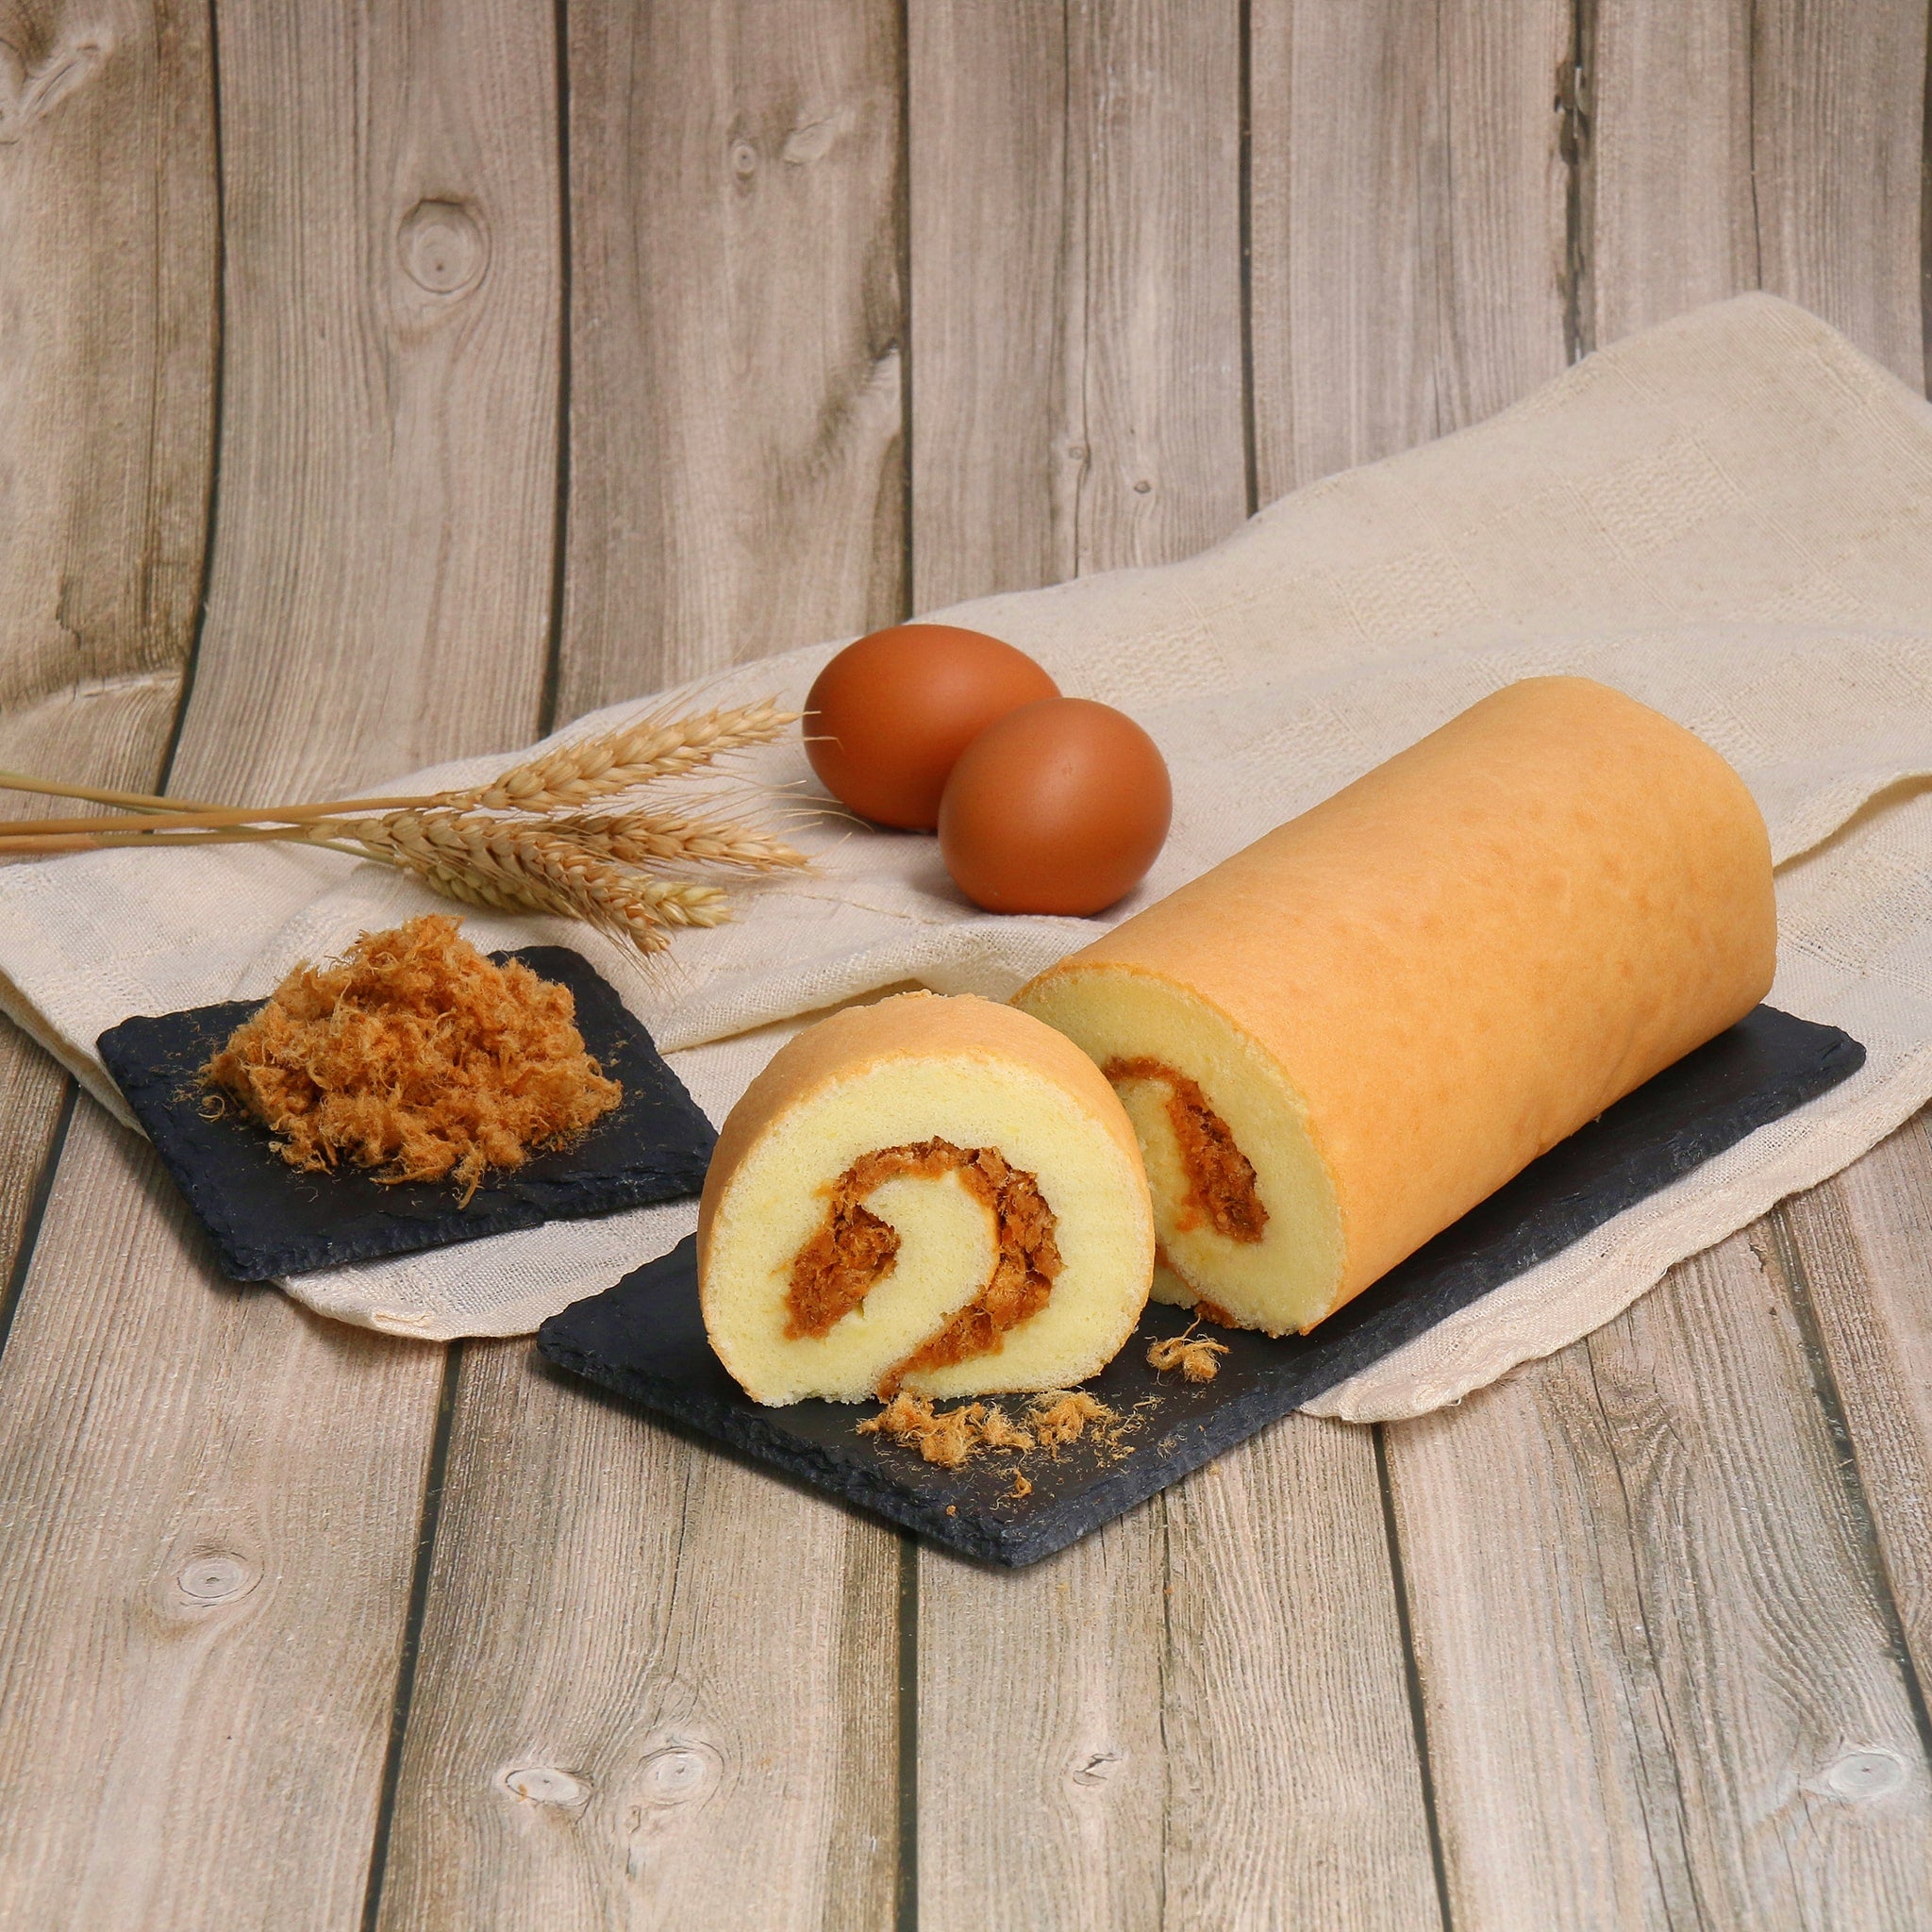 This Online Brand Offers Premium Cake Rolls With Stuffed Thick Cream &  Panna Cotta - Singapore Foodie